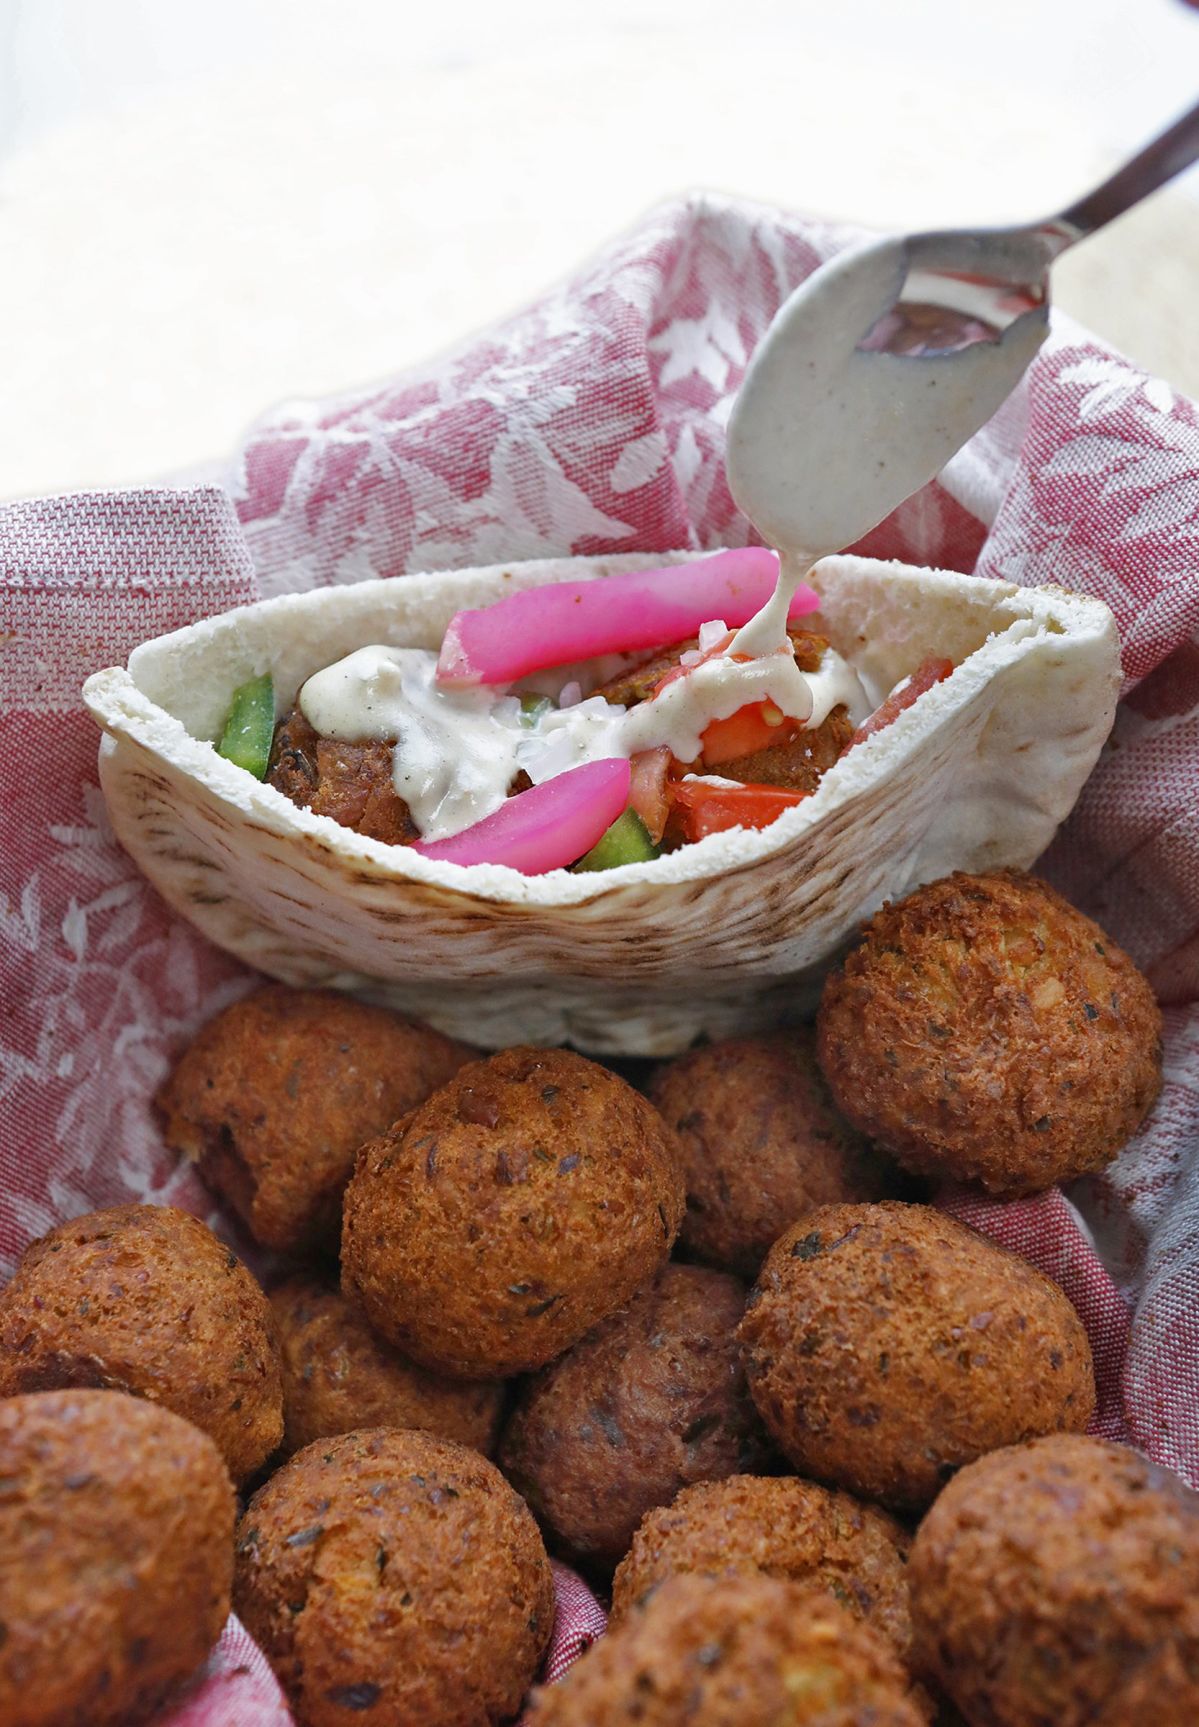 Falafel, the ubiquitous street food of the Middle East | Food and cooking | mediakits.theygsgroup.com